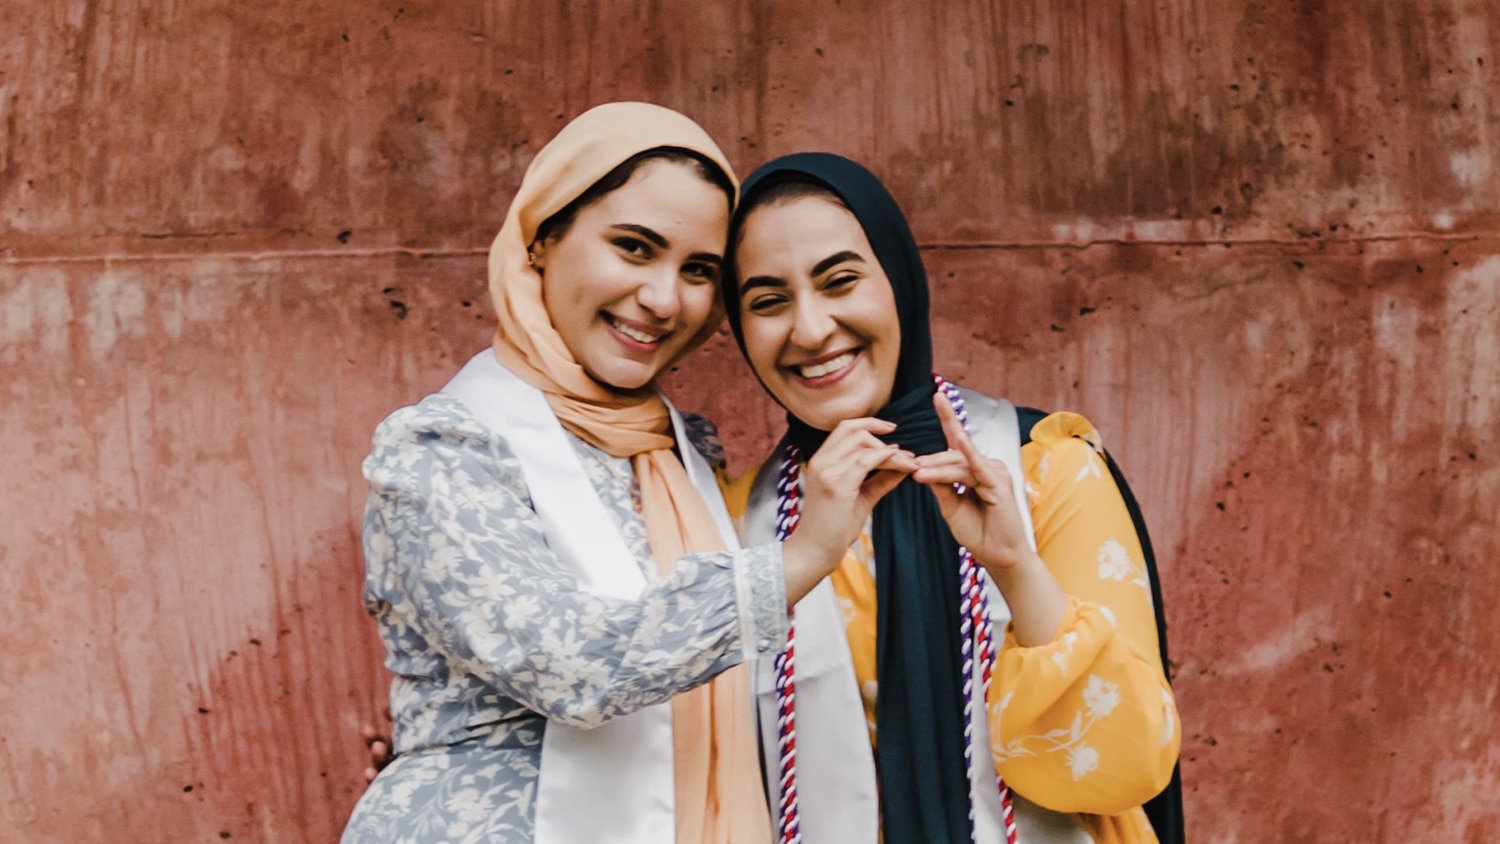 Twin sisters Iman, left, and Salam pose together at a Wolf Ears sculpture on campus and make wolf hands gestures. 